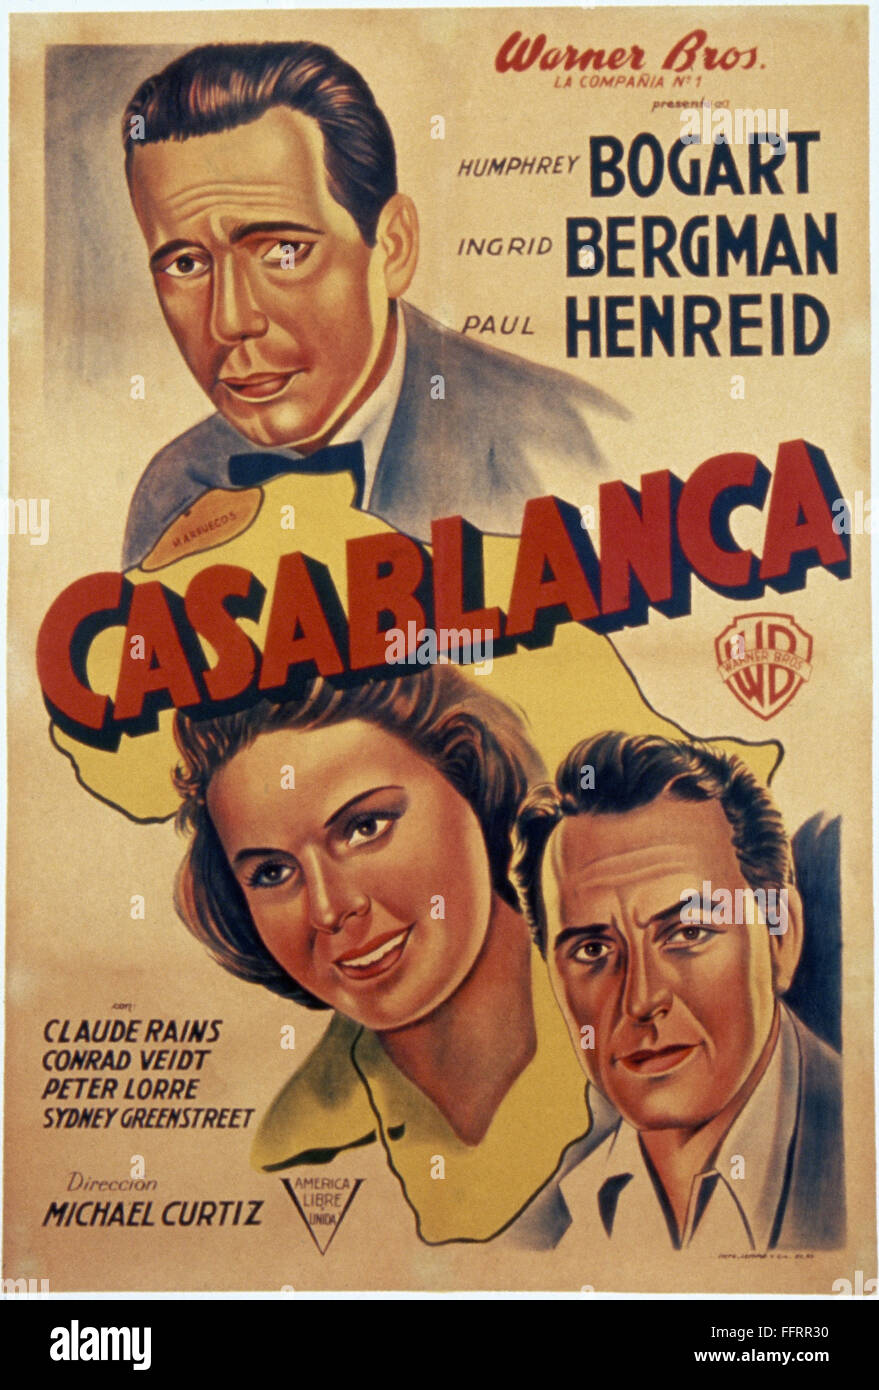 Casablanca 1942 Nargentine Poster For The American Film Casablanca 1942 Featuring Stars